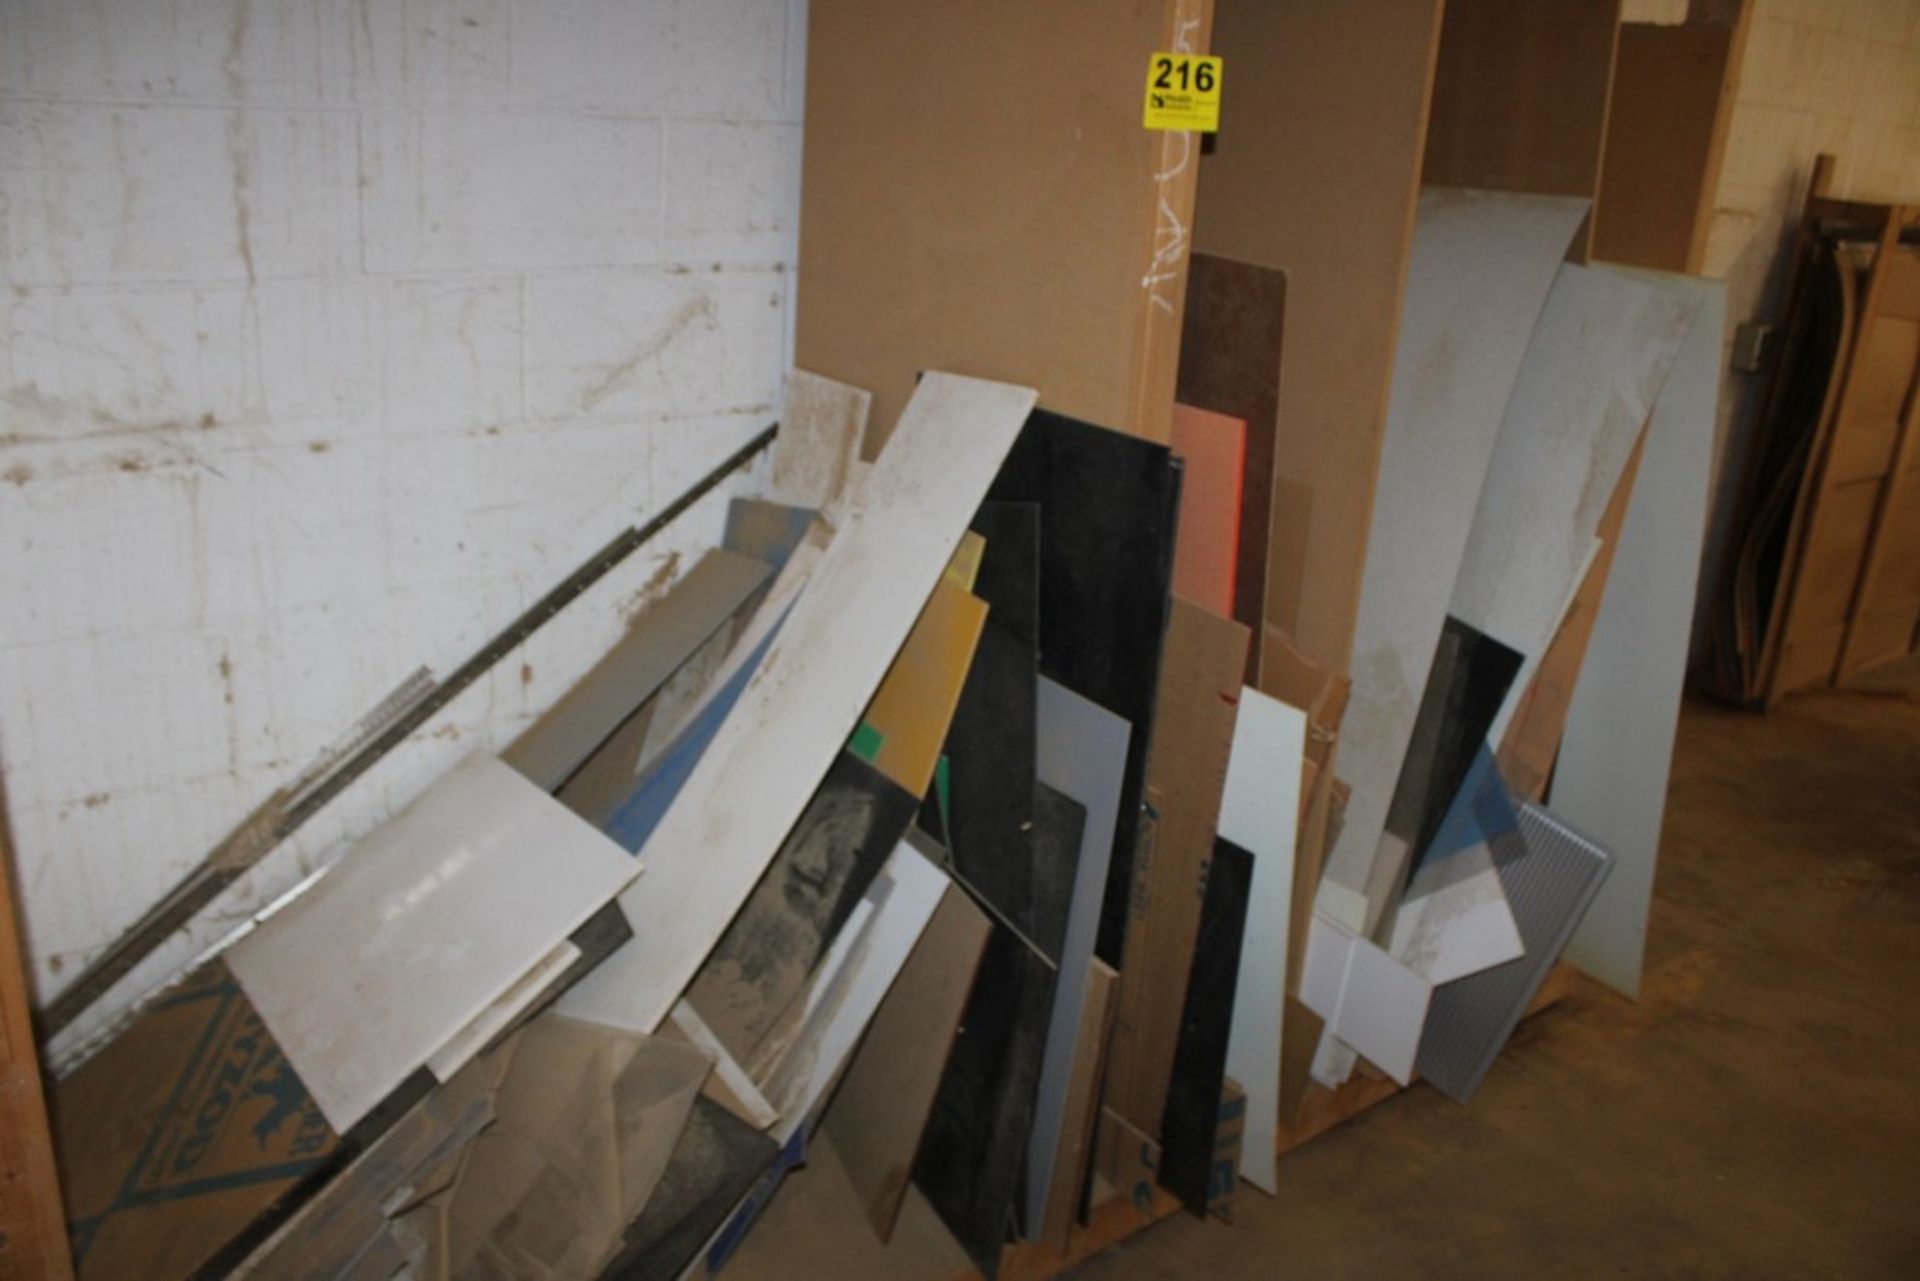 ASSORTED LAMINATE SHEETS WITH STORAGE RACK - Image 2 of 2